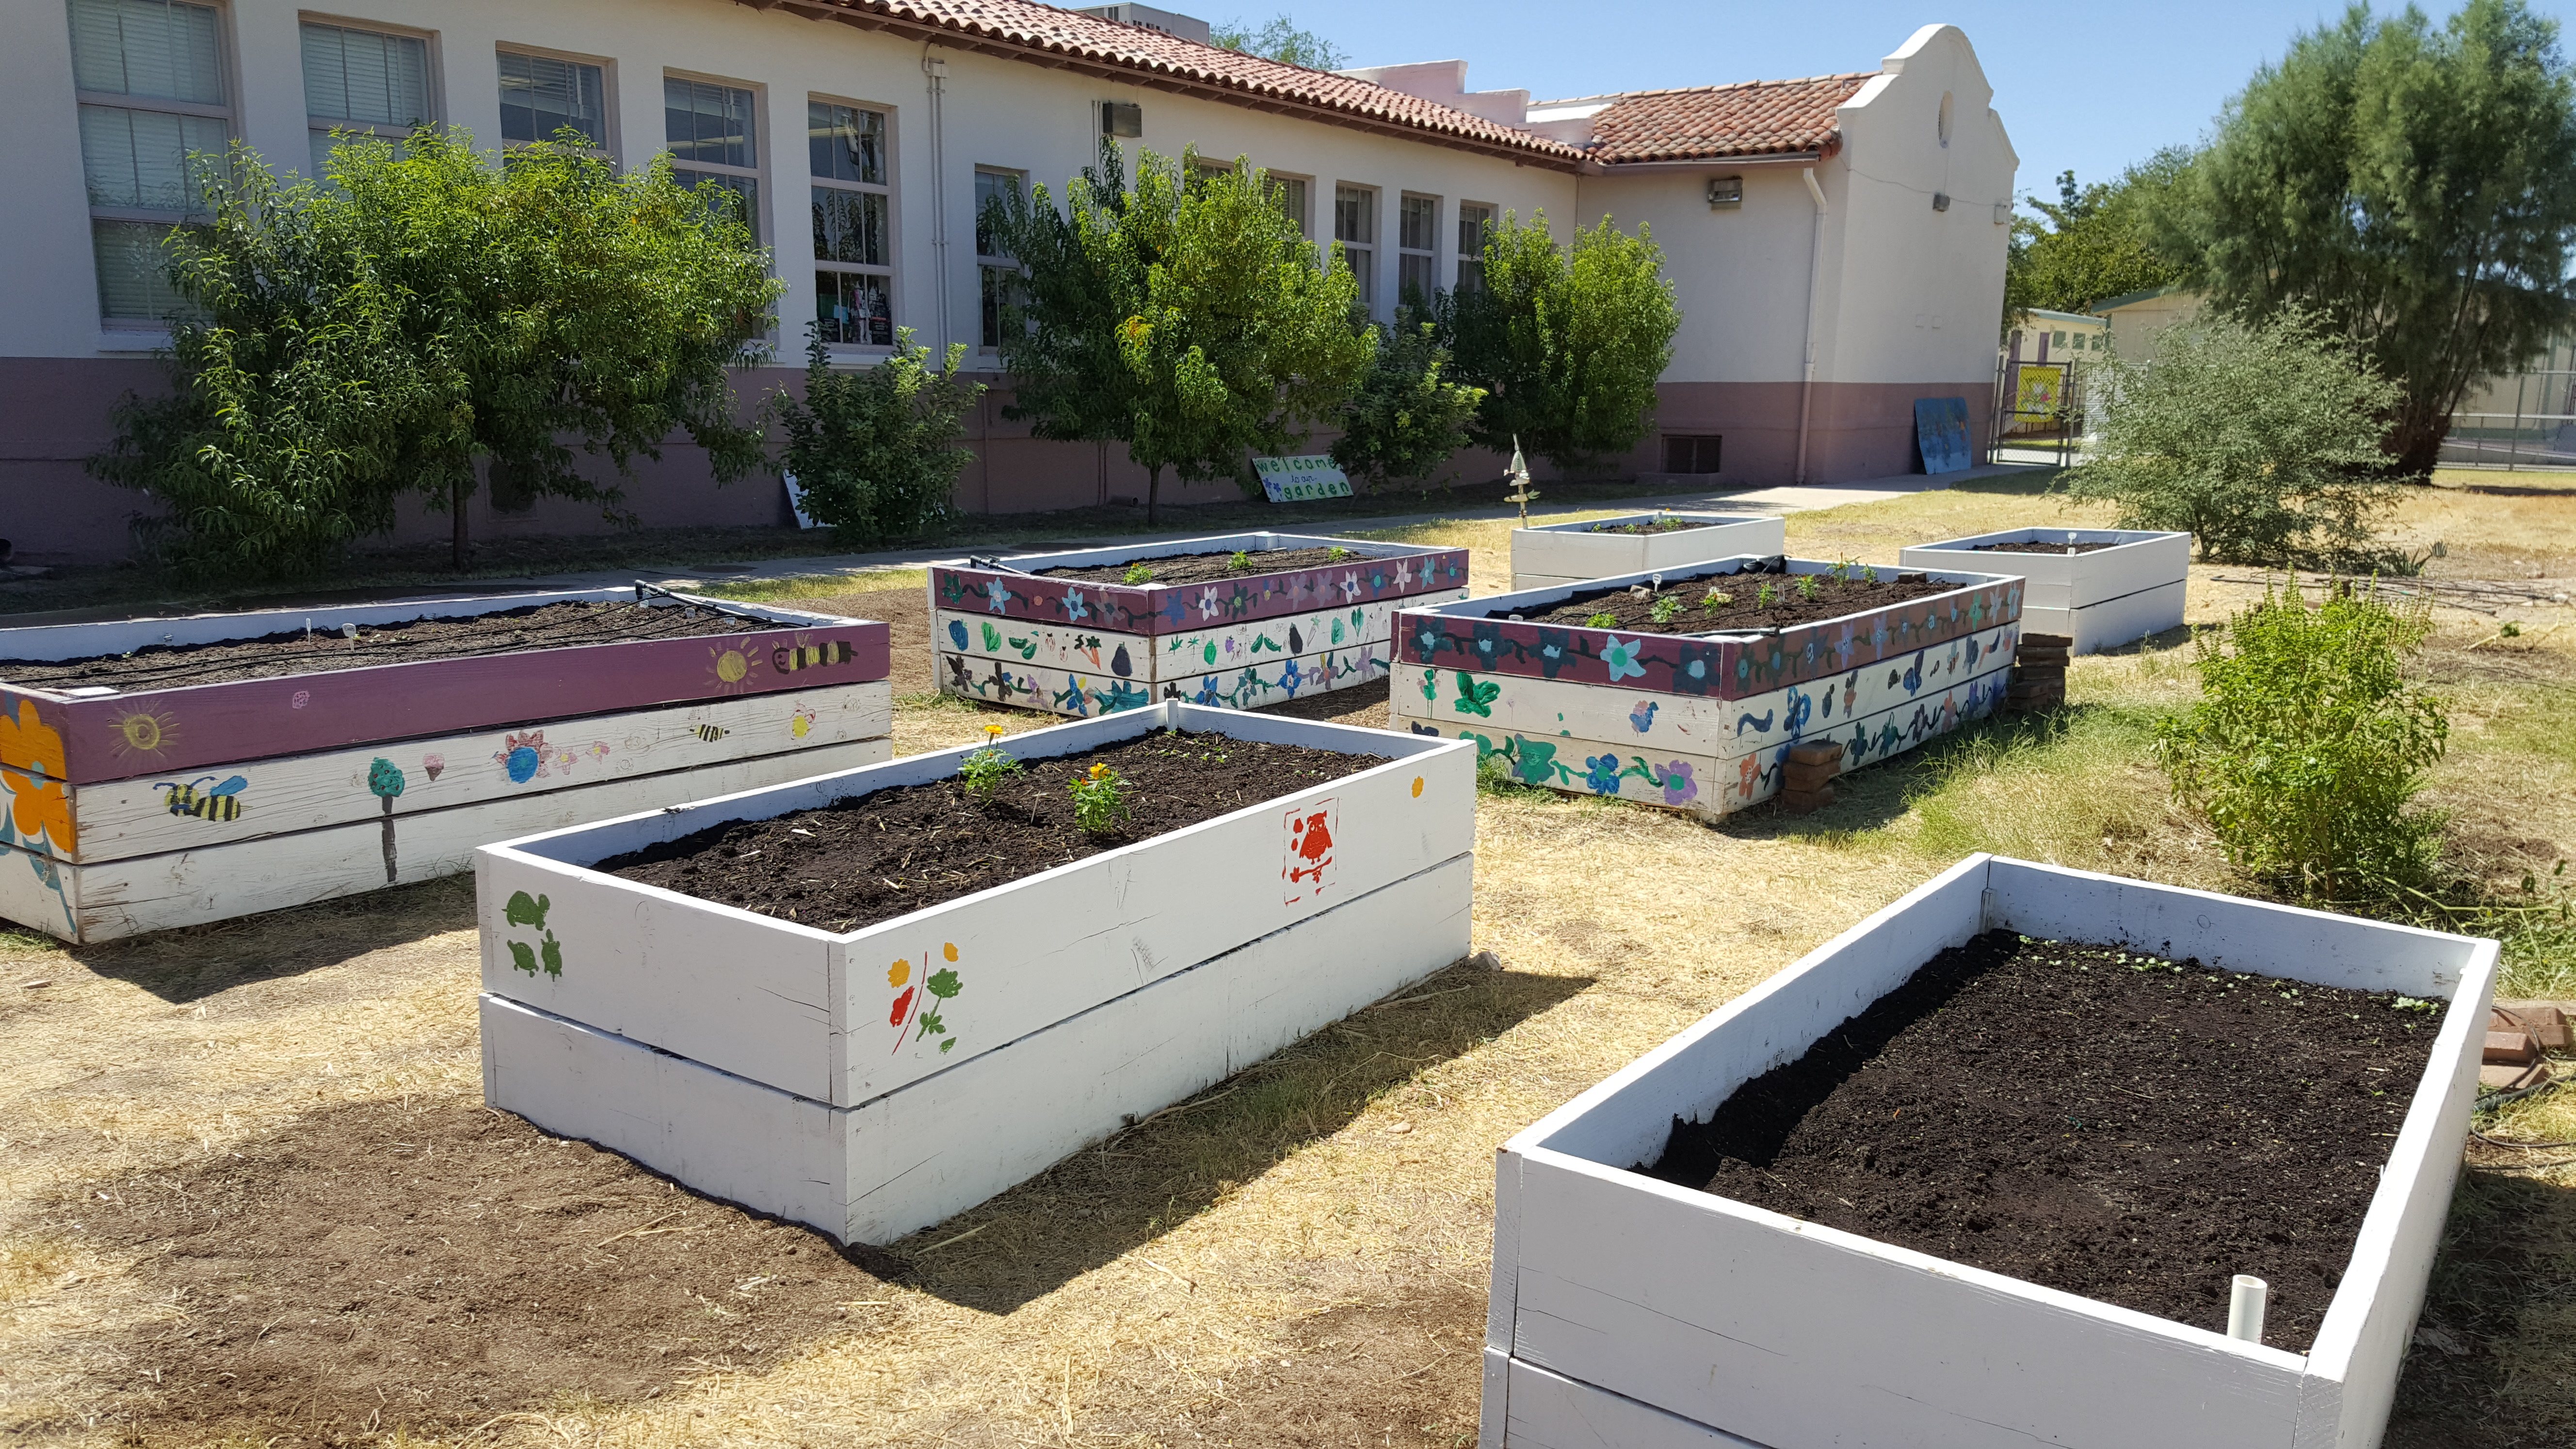 Multiple elevated squares of garden painted by children